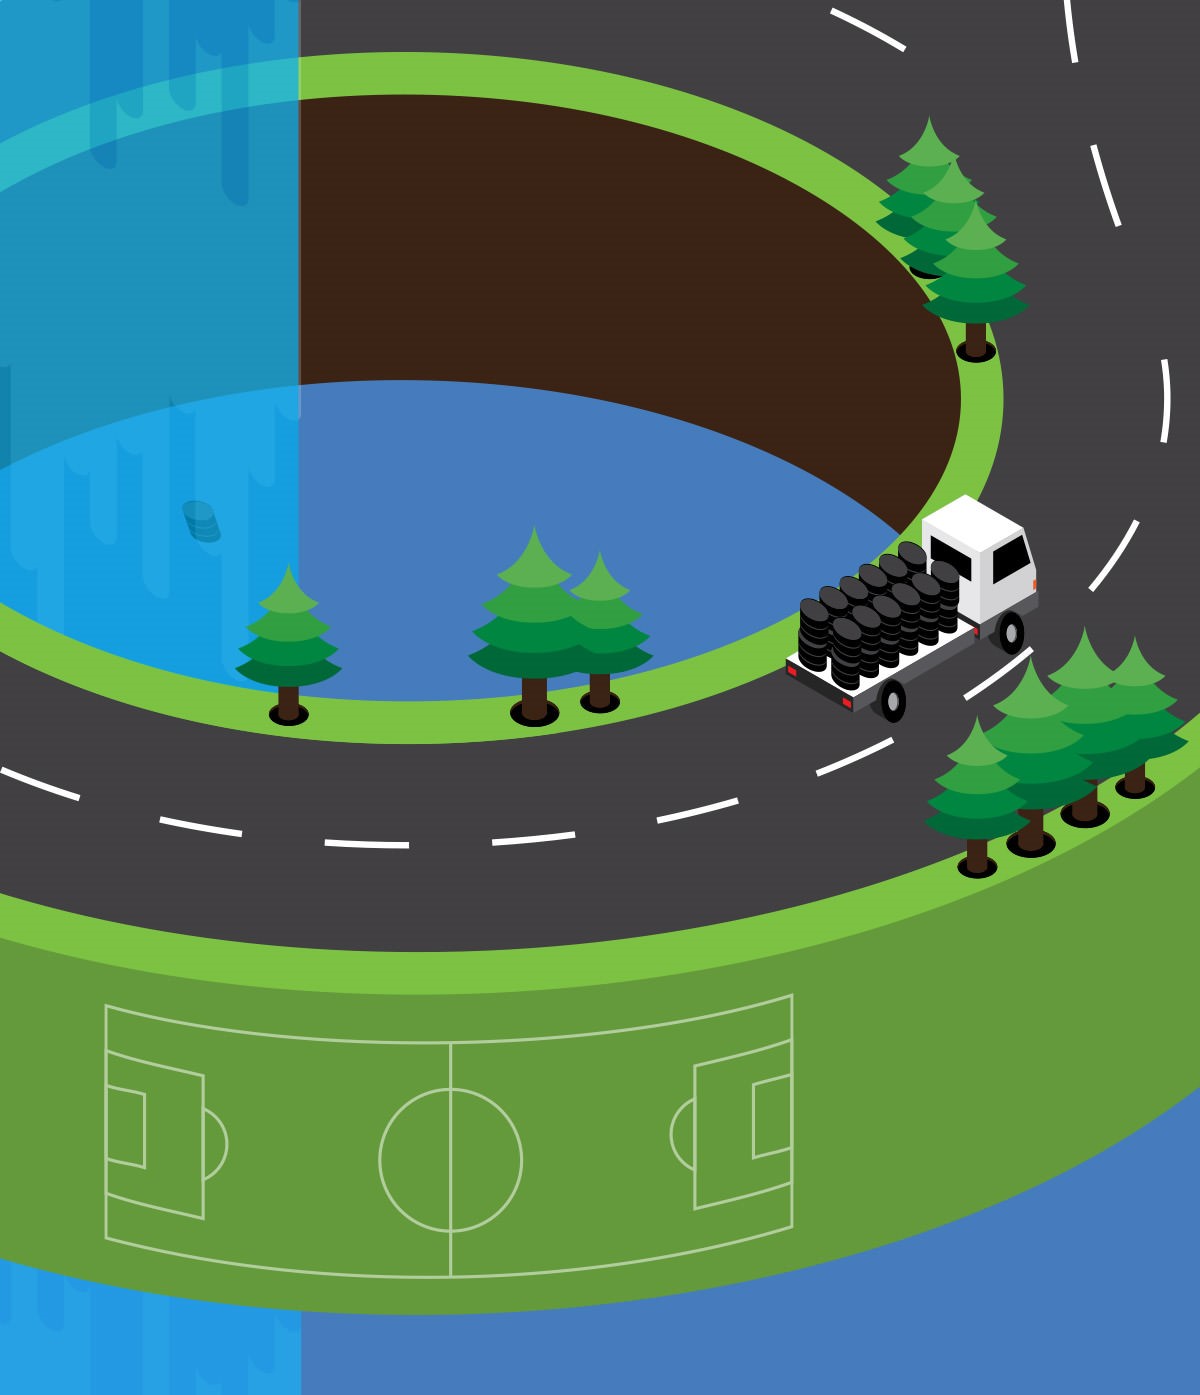 Dsposal. Isometric illustration. Close up detail of the football pitch. Created by Superfried.